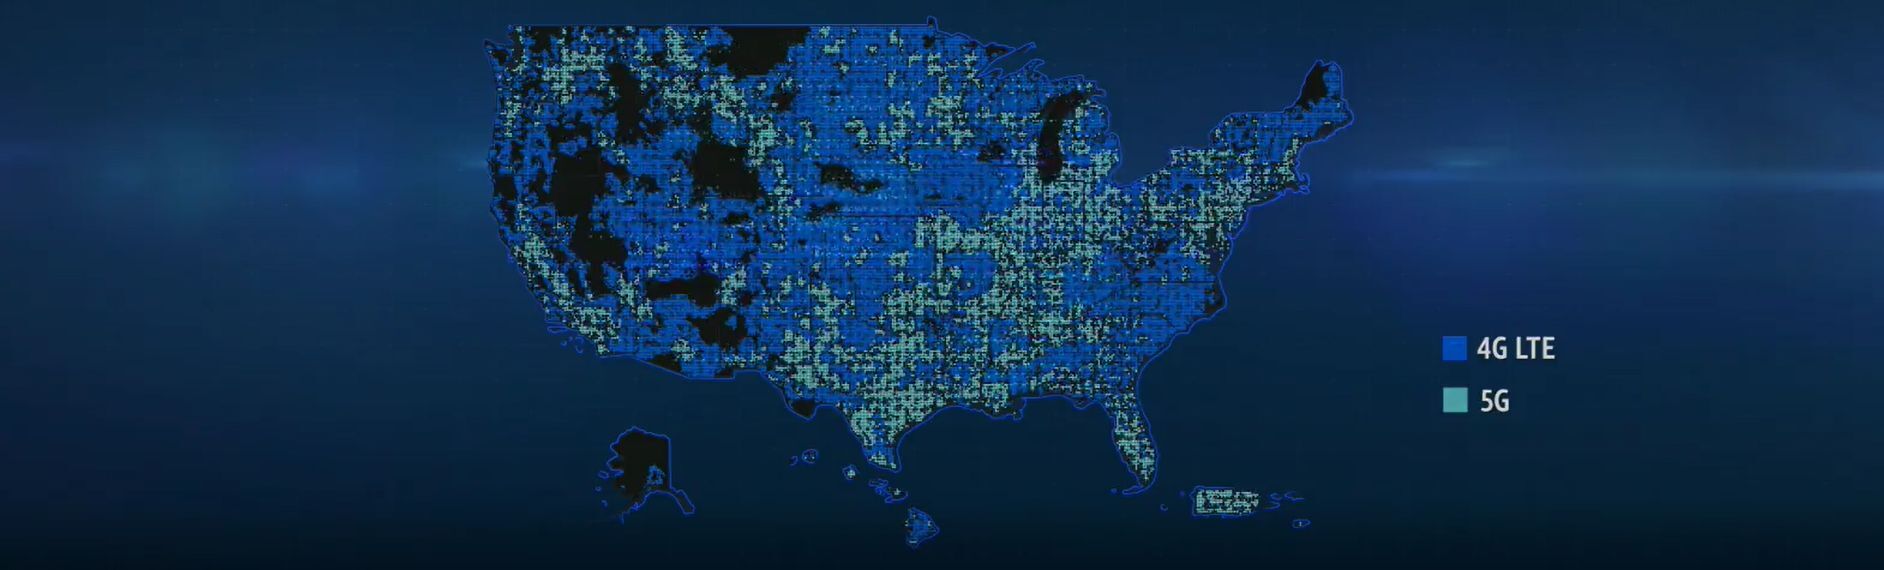 AT&amp;amp;T coverage in early 2021 - AT&amp;T 5G / 5G E network coverage map: which cities are covered?